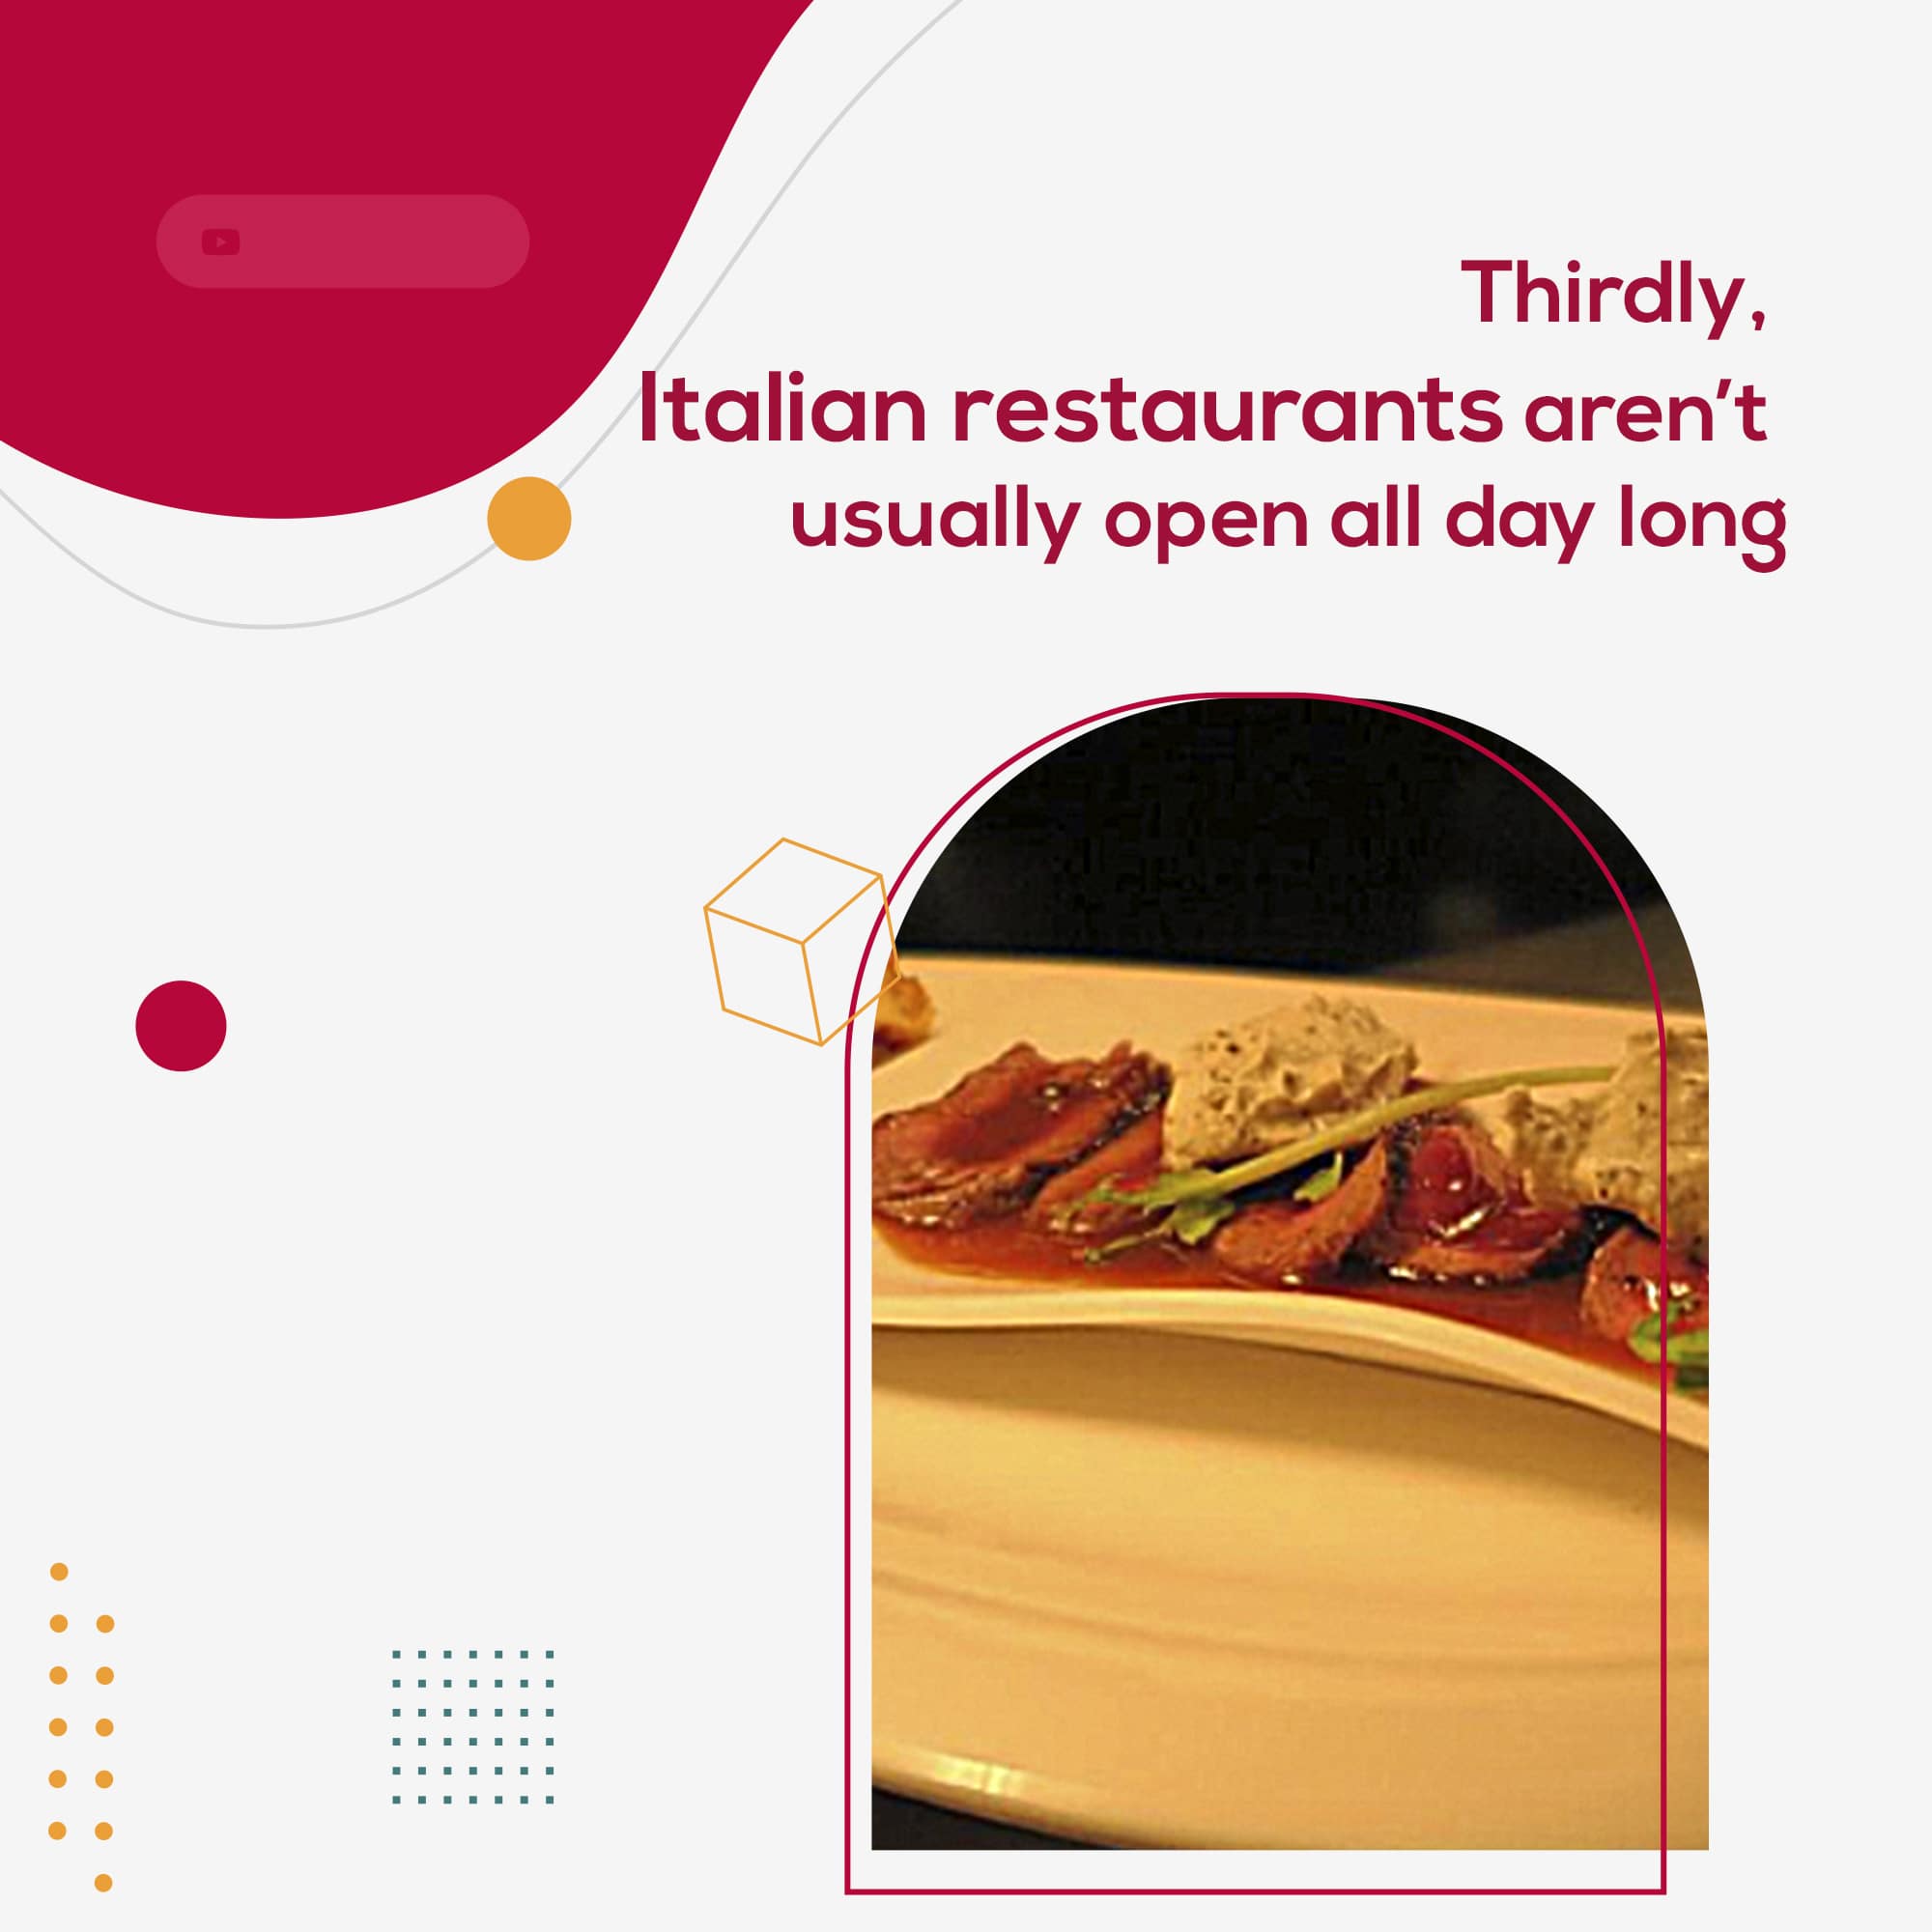 Thirdly, Italian restaurants aren’t usually open all day long